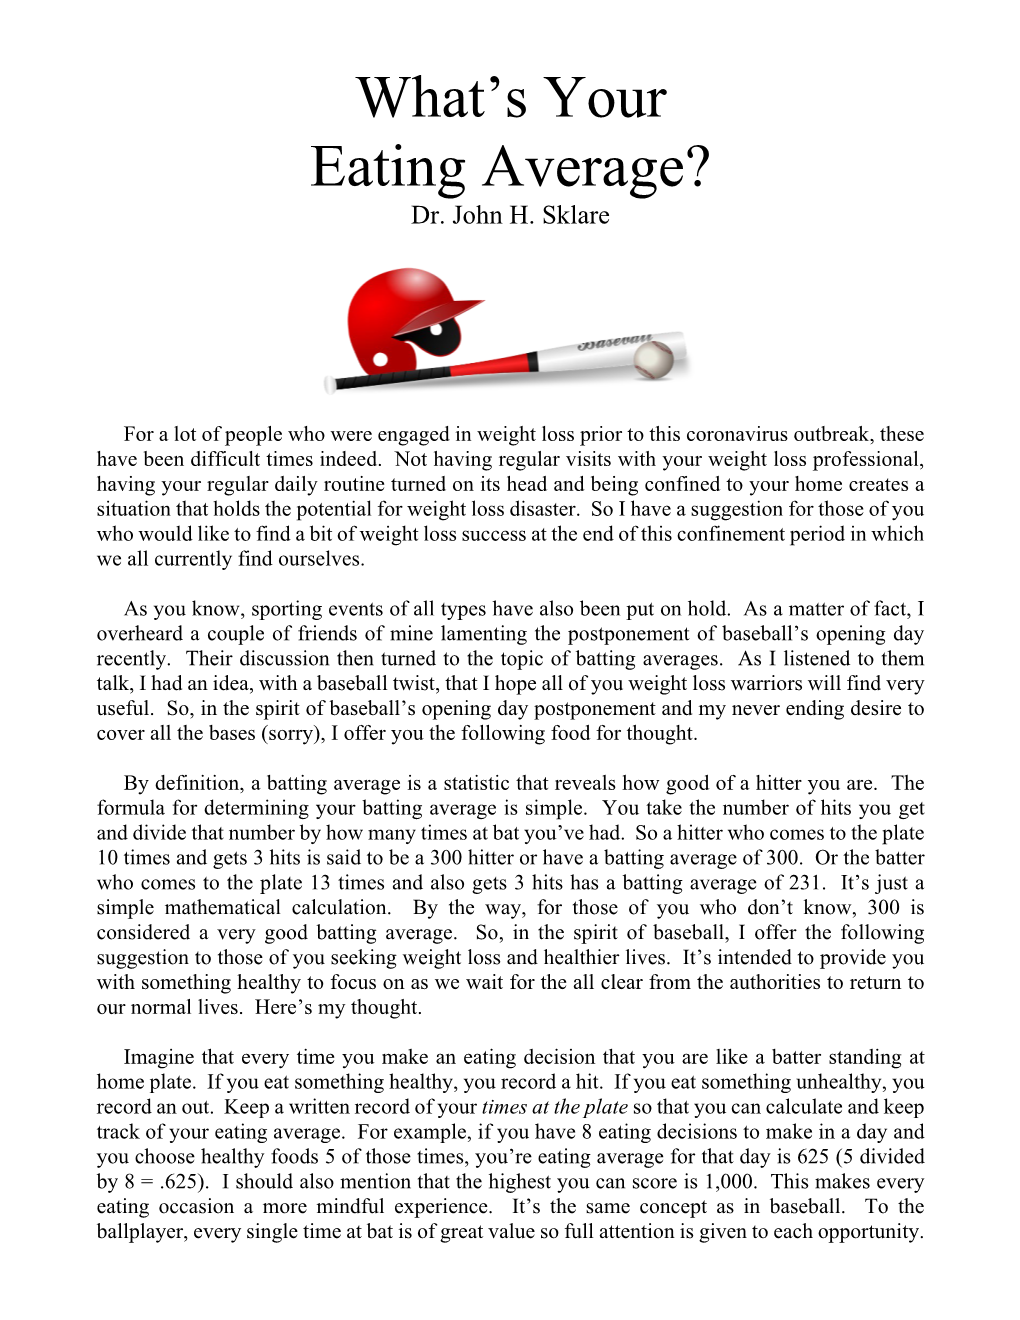 What's Your Eating Average?